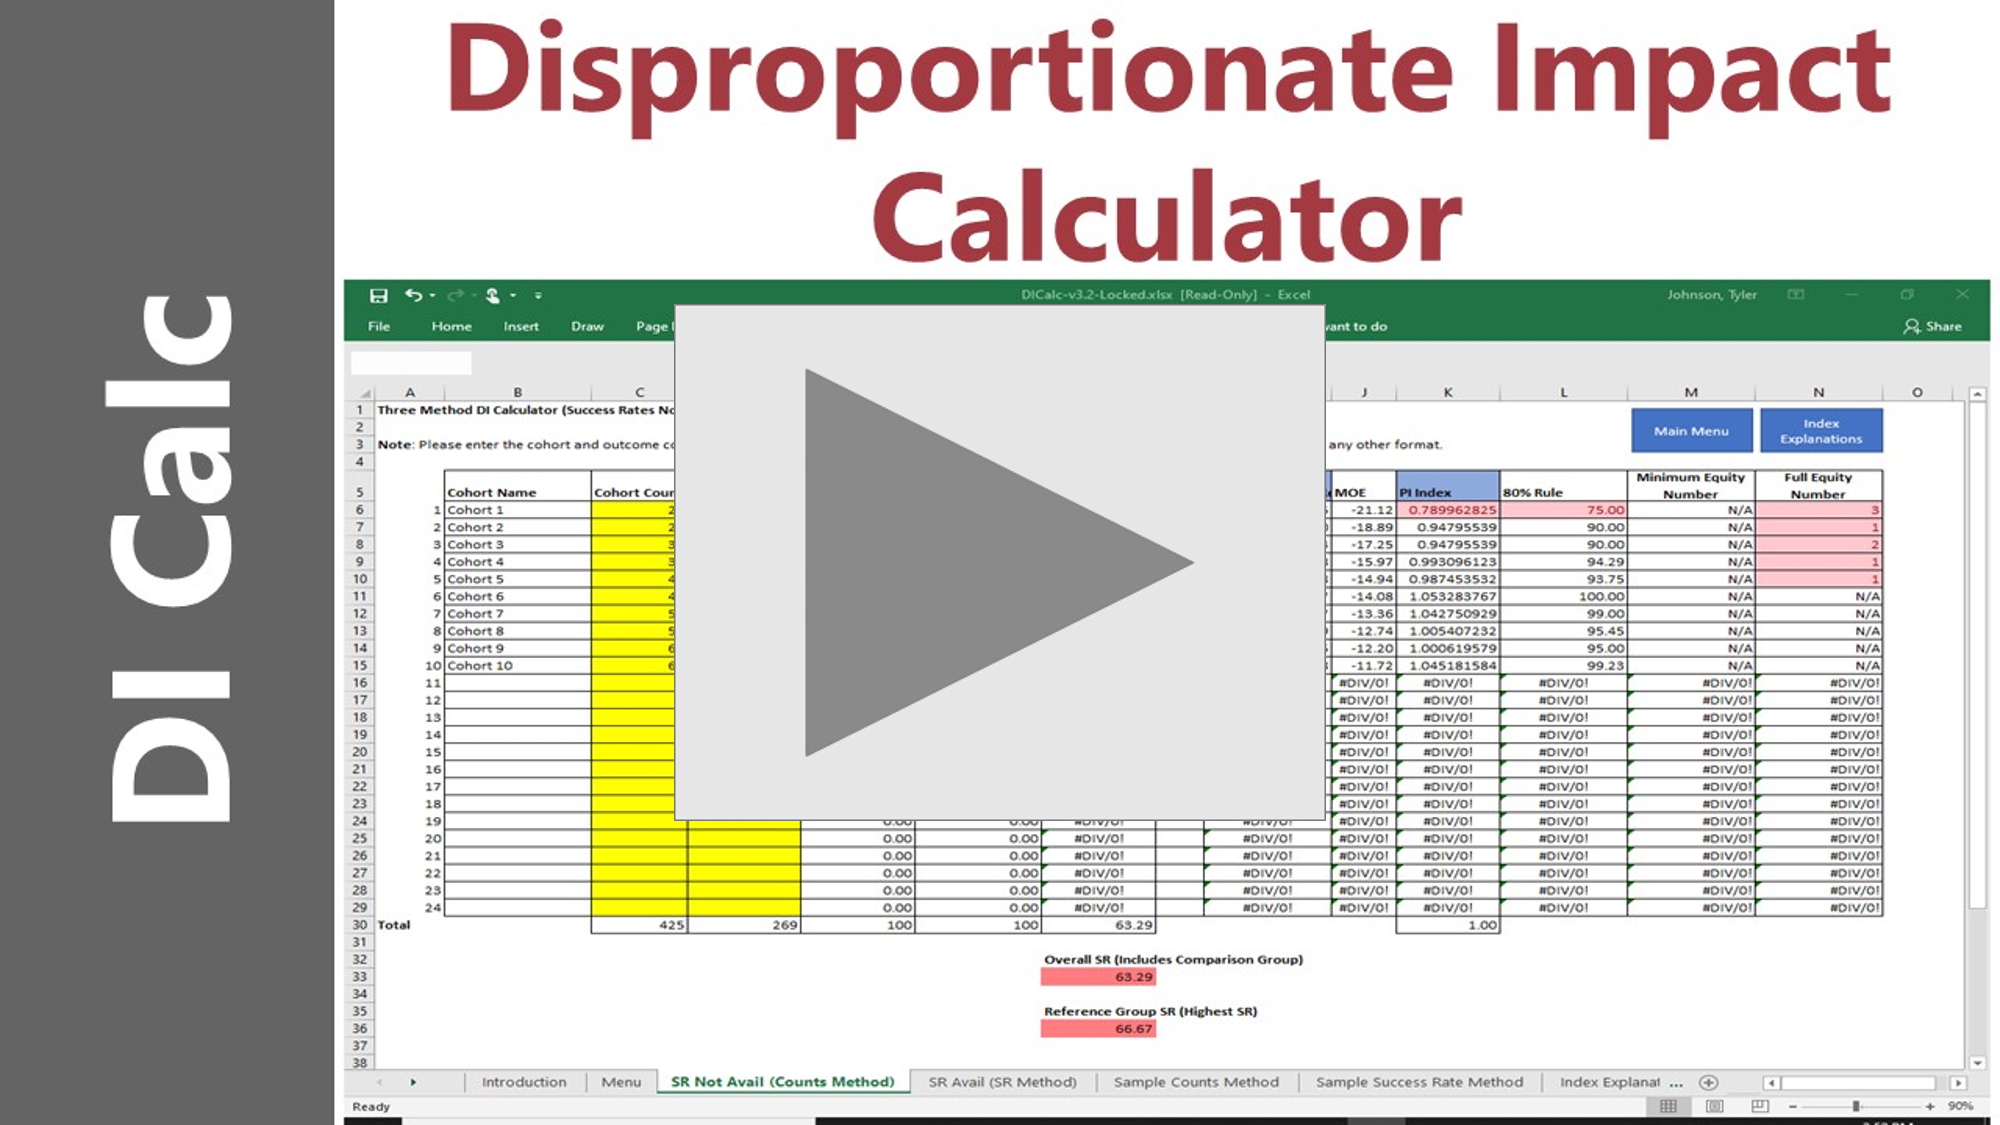 Image and link to Disproportionate Impact Calculator Tutorial Video 